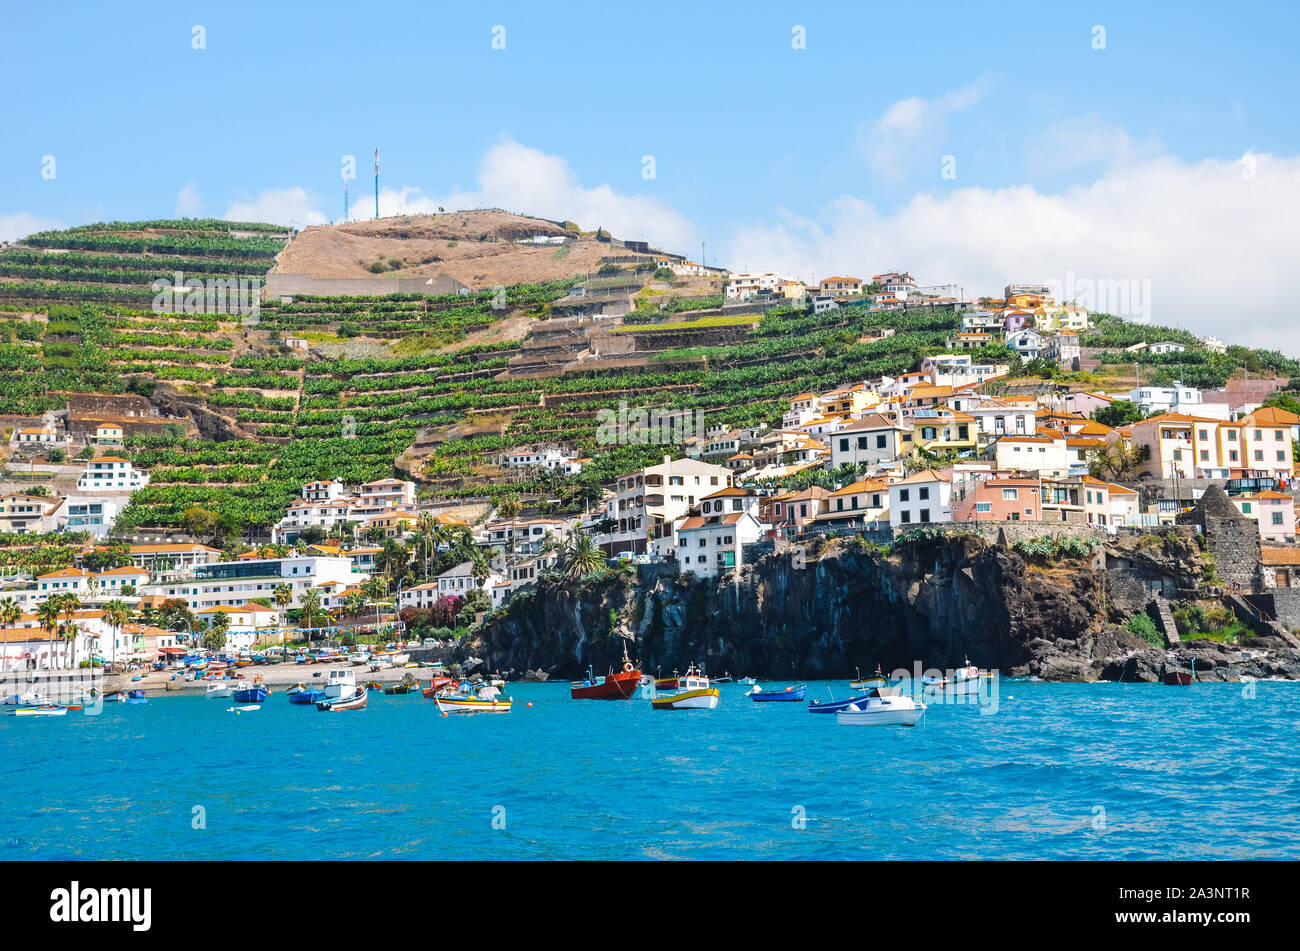 Amazing village Camara de Lobos in Madeira Island, Portugal photographed from the waters of the Atlantic ocean. Small city on a hill by the coast. Tourist destination. Banana plantation on the slope. Stock Photo